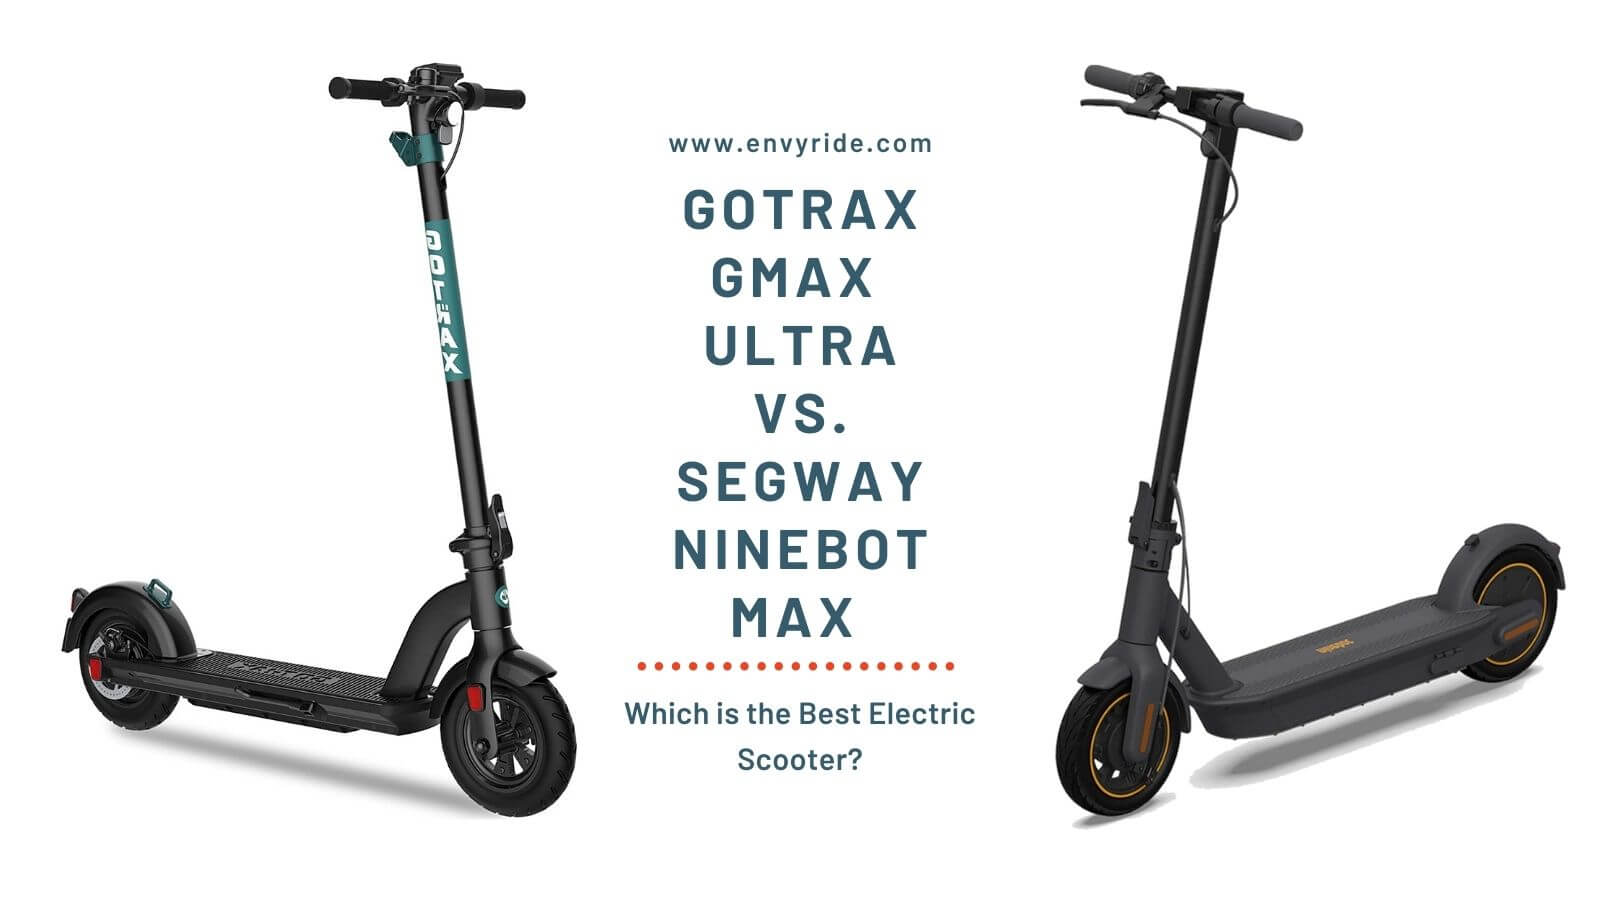 GoTrax Gmax Ultra vs. Segway Ninebot Max: Which is the Best Electric Scooter?